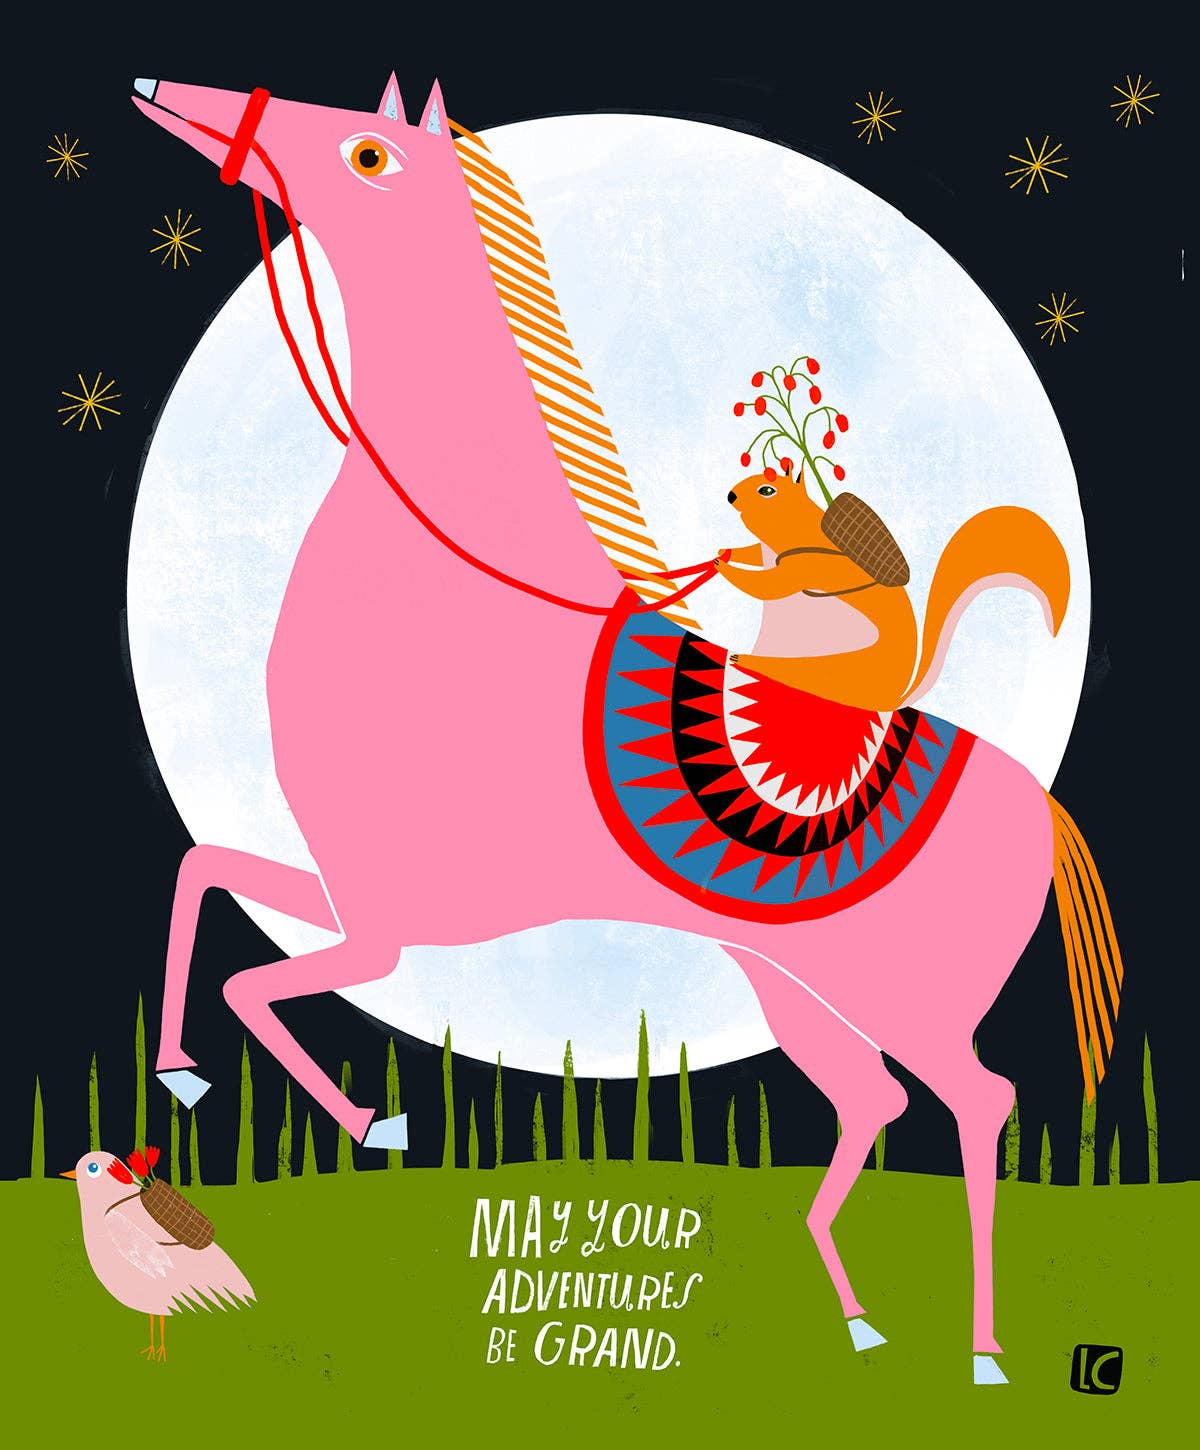 May Your Adventure Be Grand by Lisa Congdon